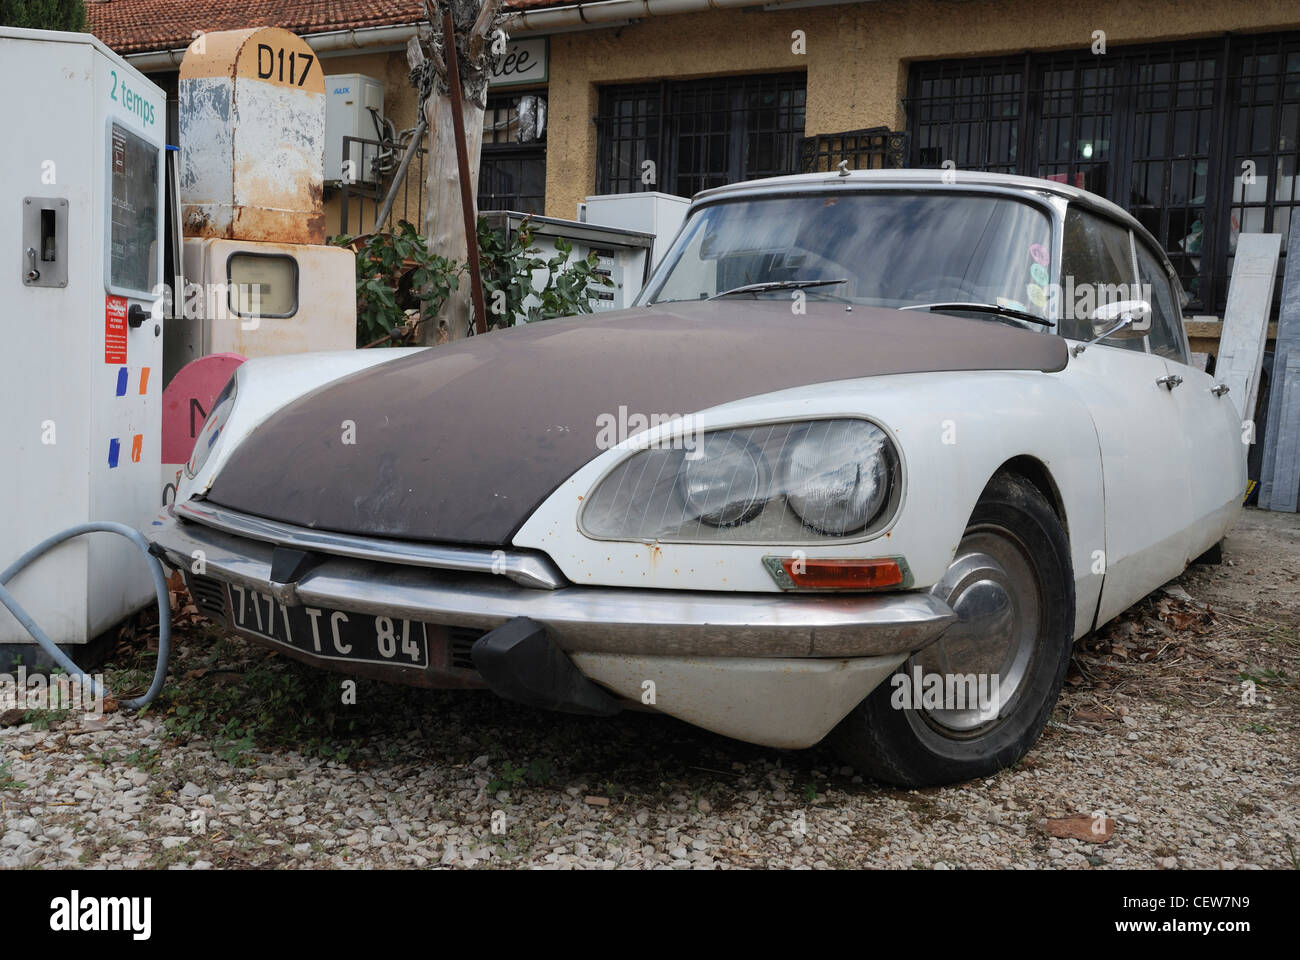 A Citroen DS car on display at an antique shop. Orange, Vaucluse, Provence, France. Stock Photo